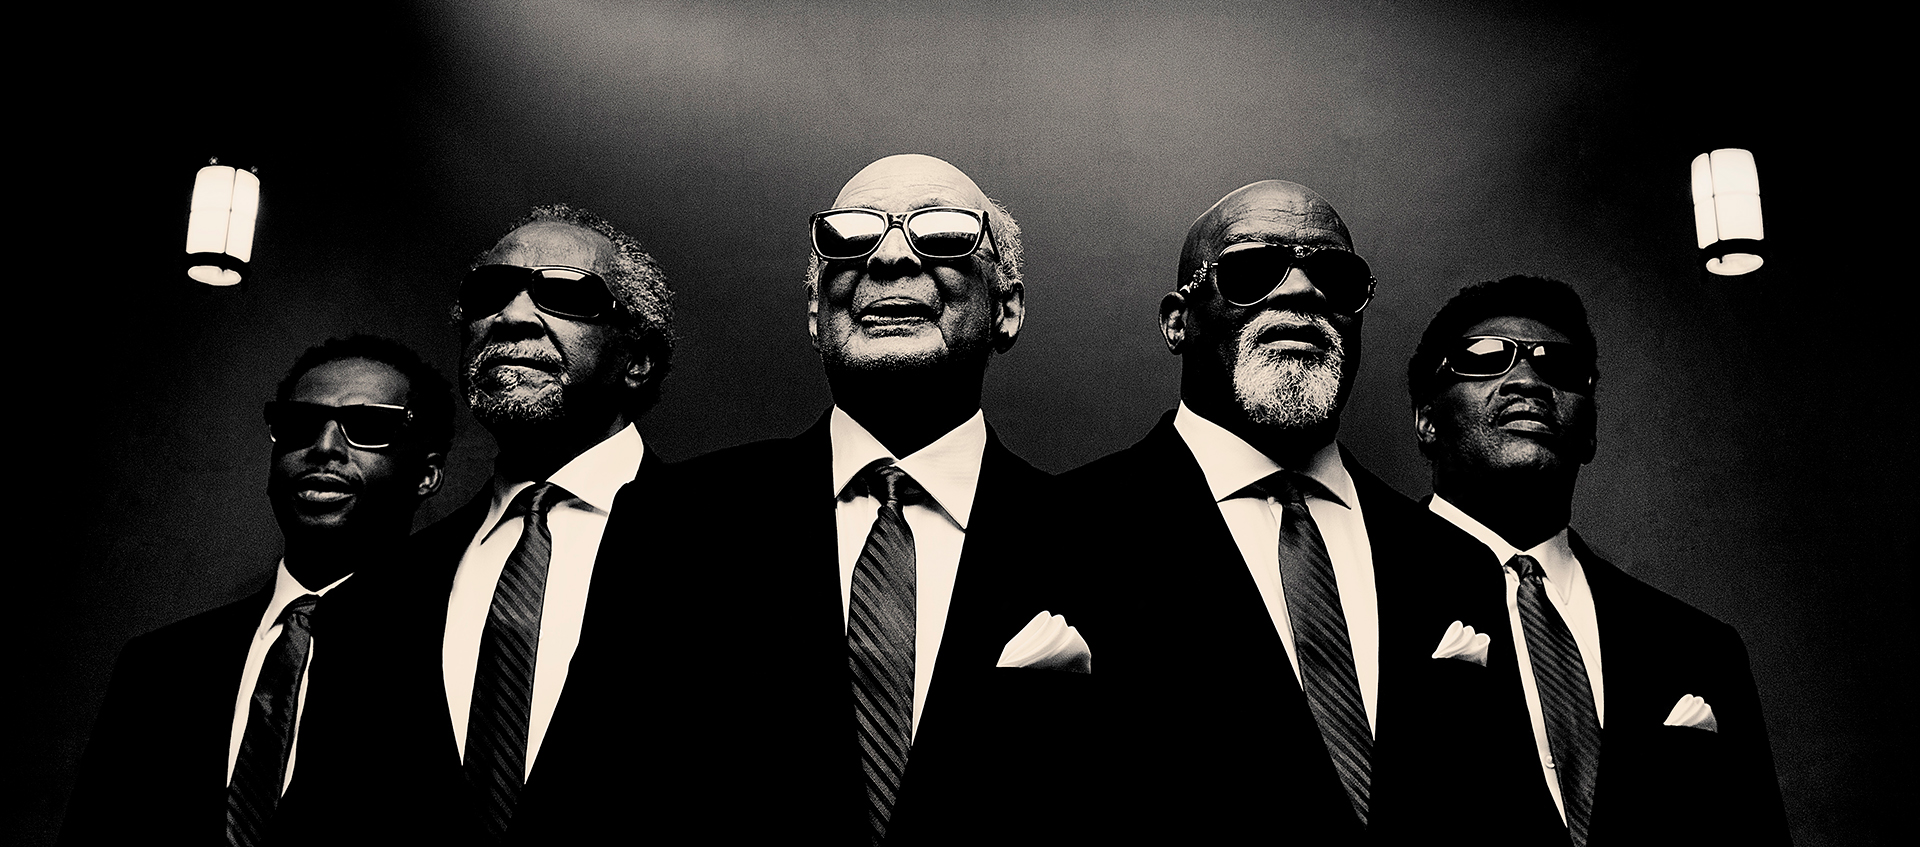 Black-and-white photo, shot from a low angle, of five older Black men wearing suits, ties, and sunglasses. There is a rose window above them.